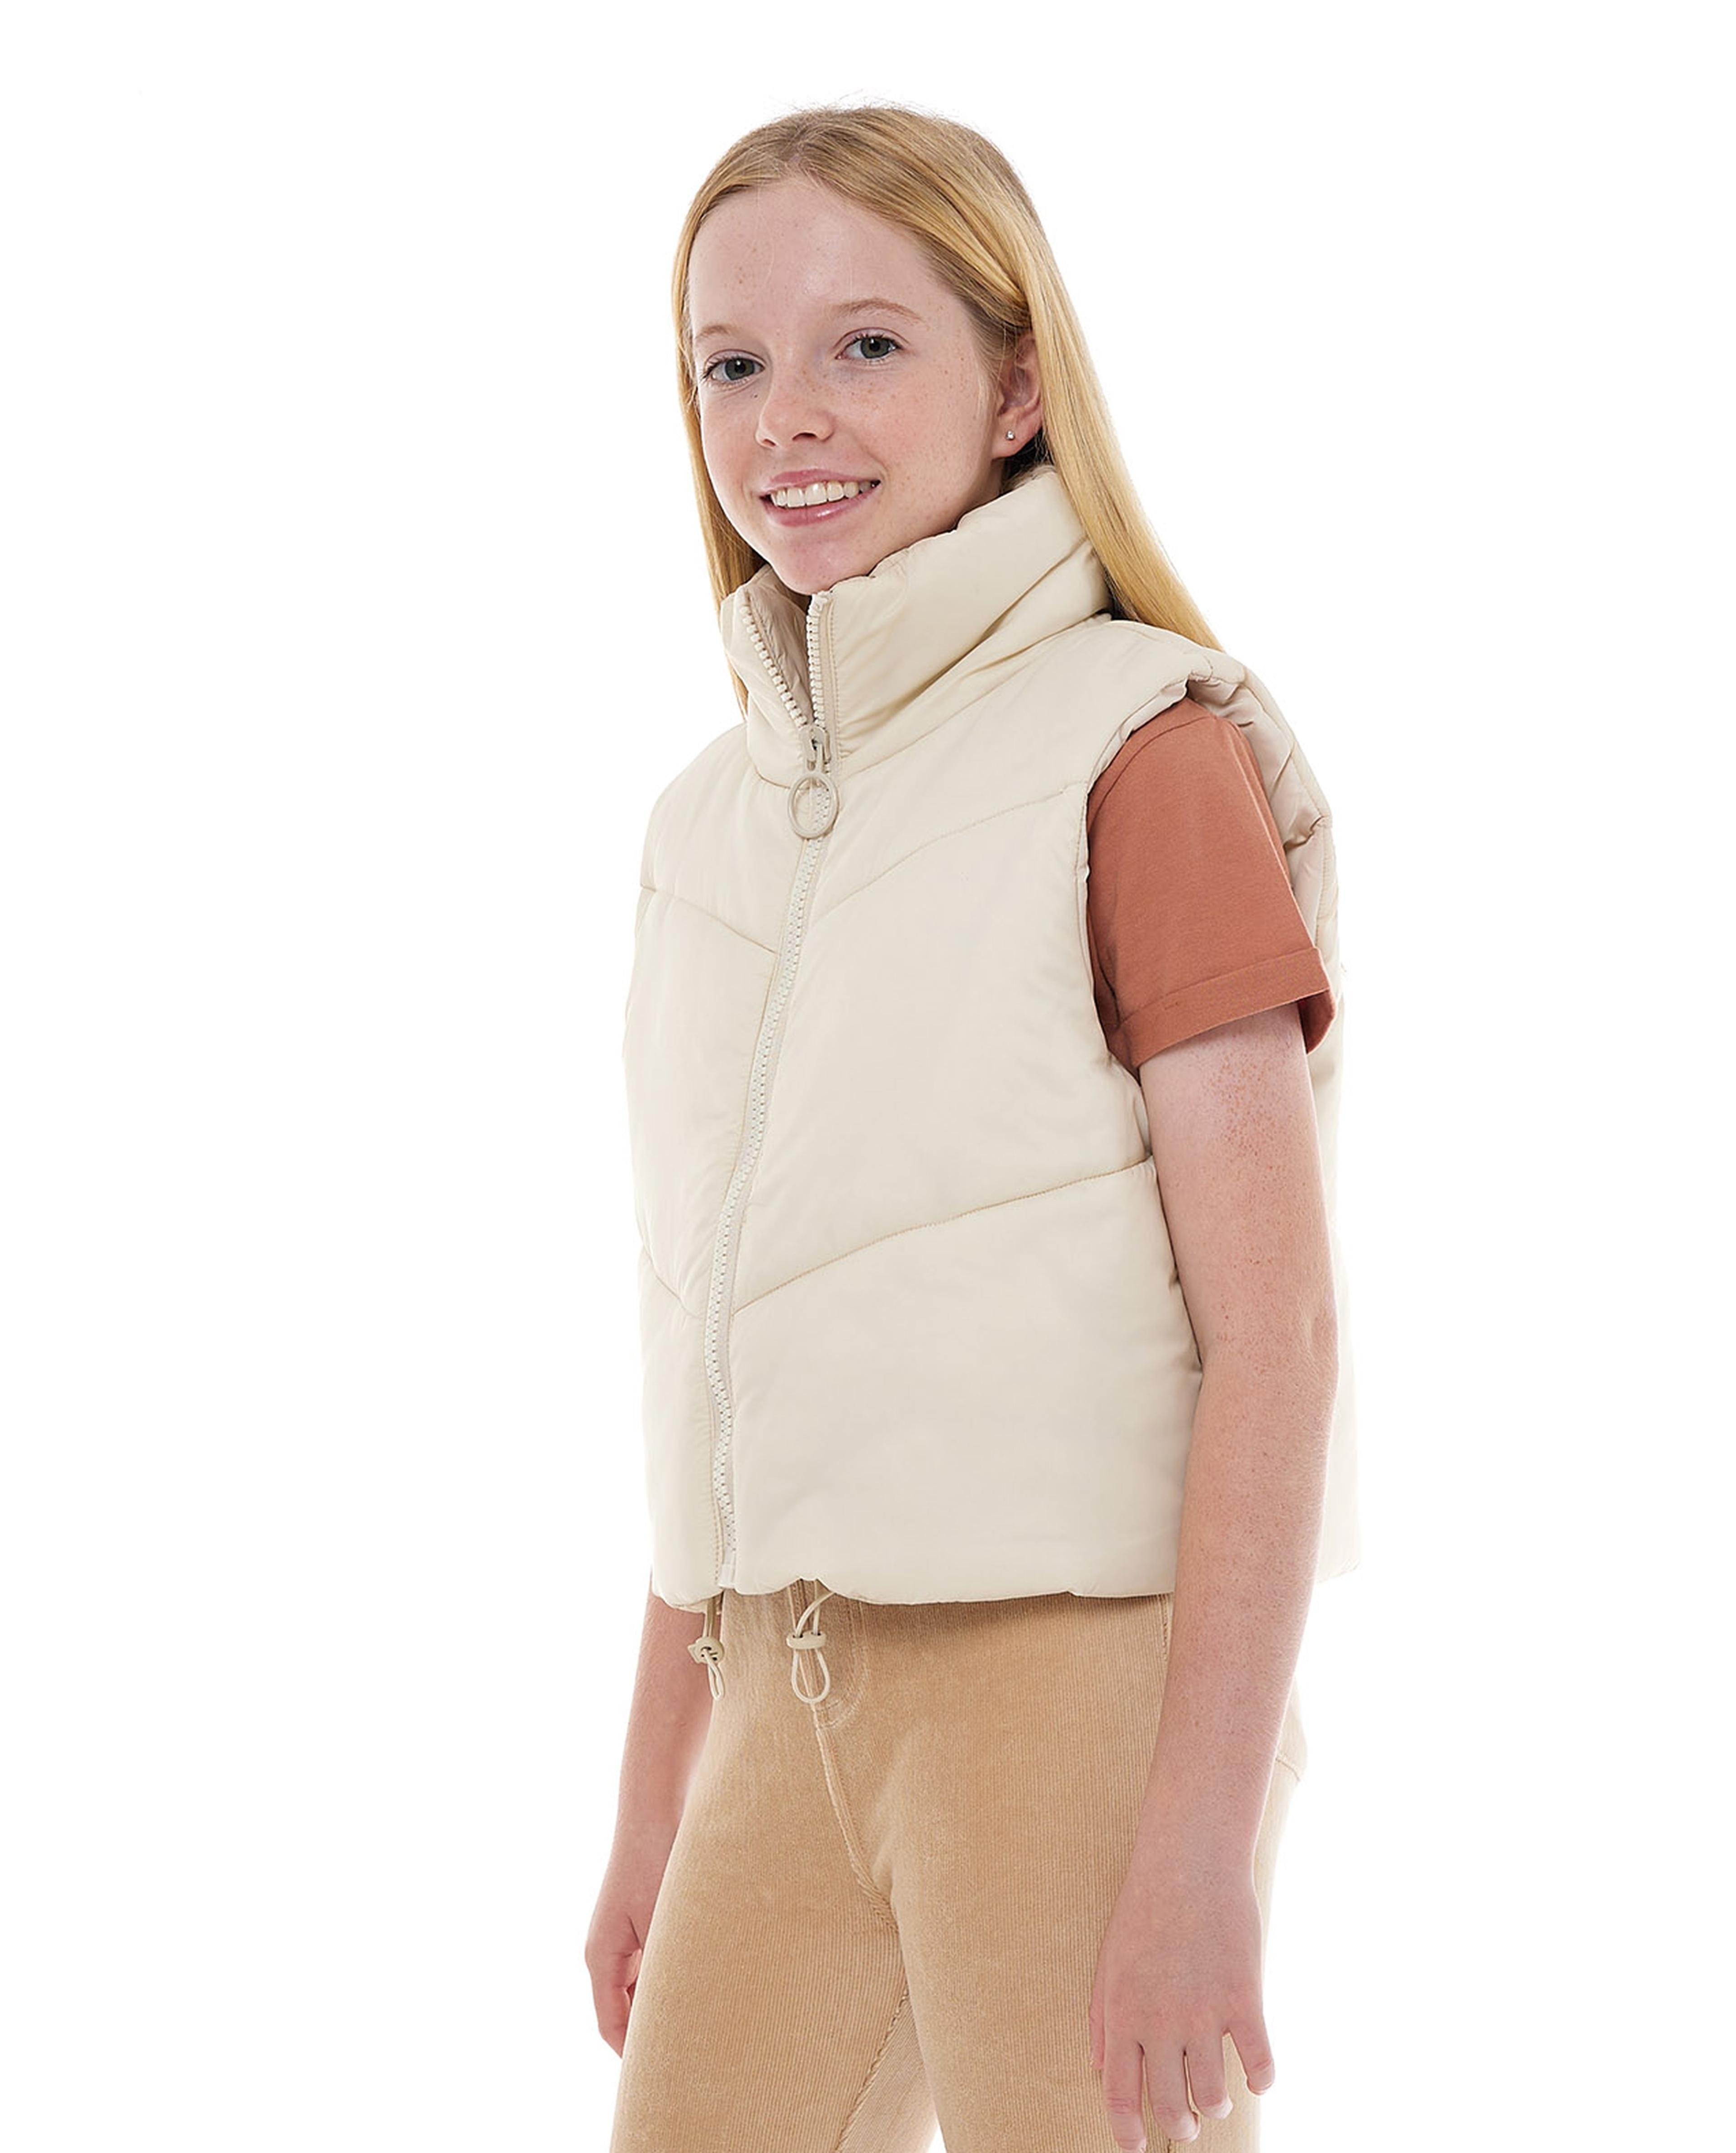 Solid Gilet with Zipper Closure